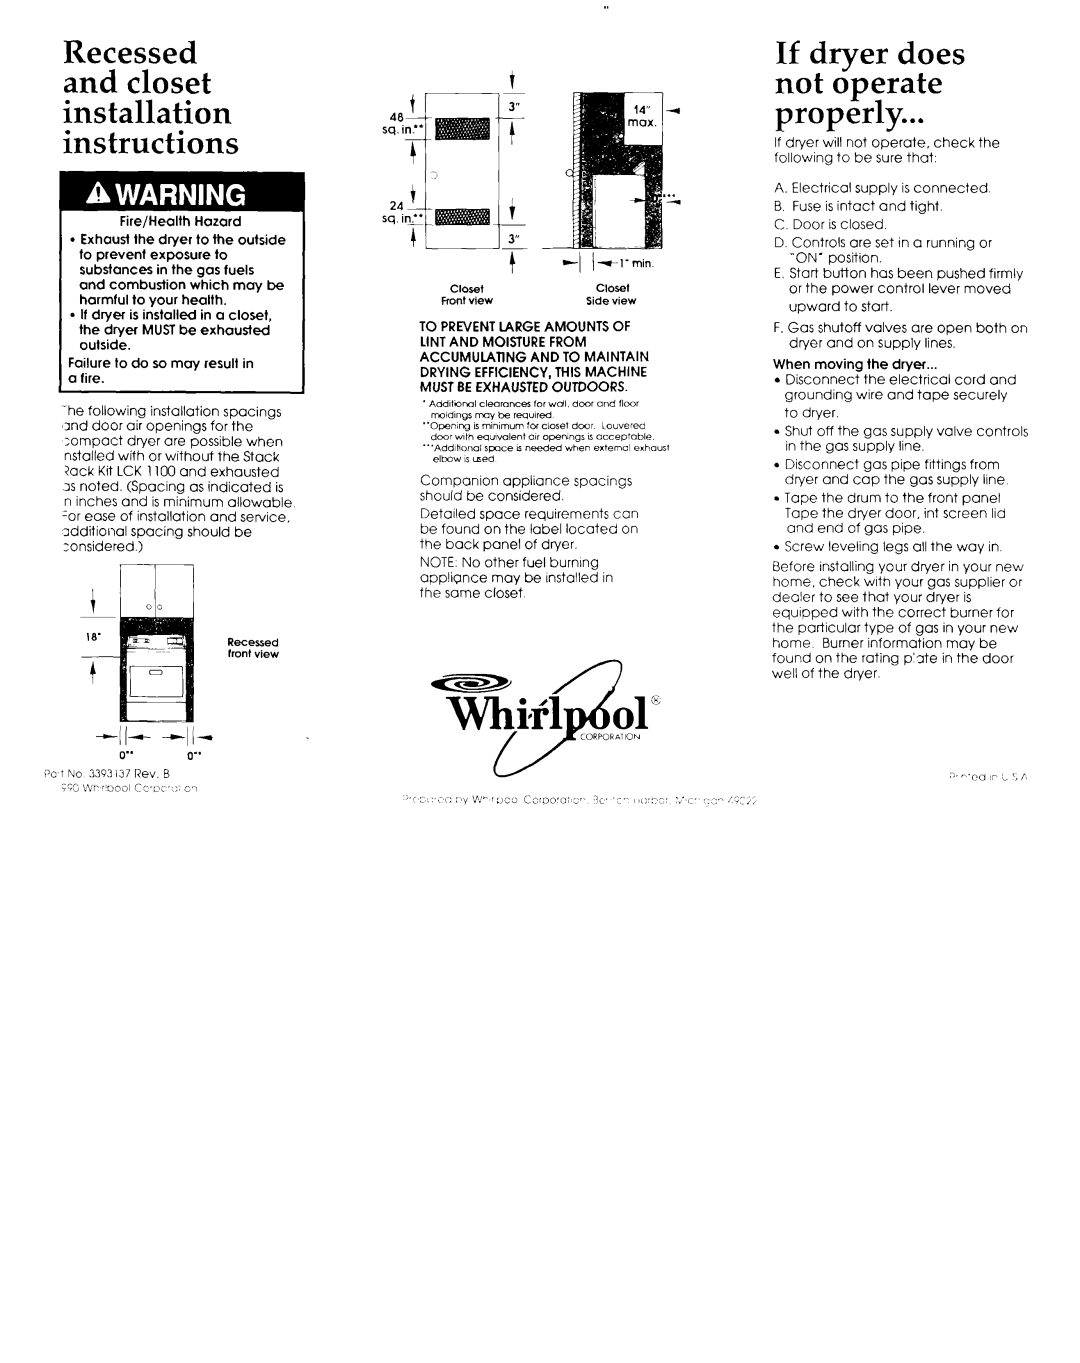 Whirlpool 3393 137 If drver does not dperate properly, Recessed and closet installation instructions 